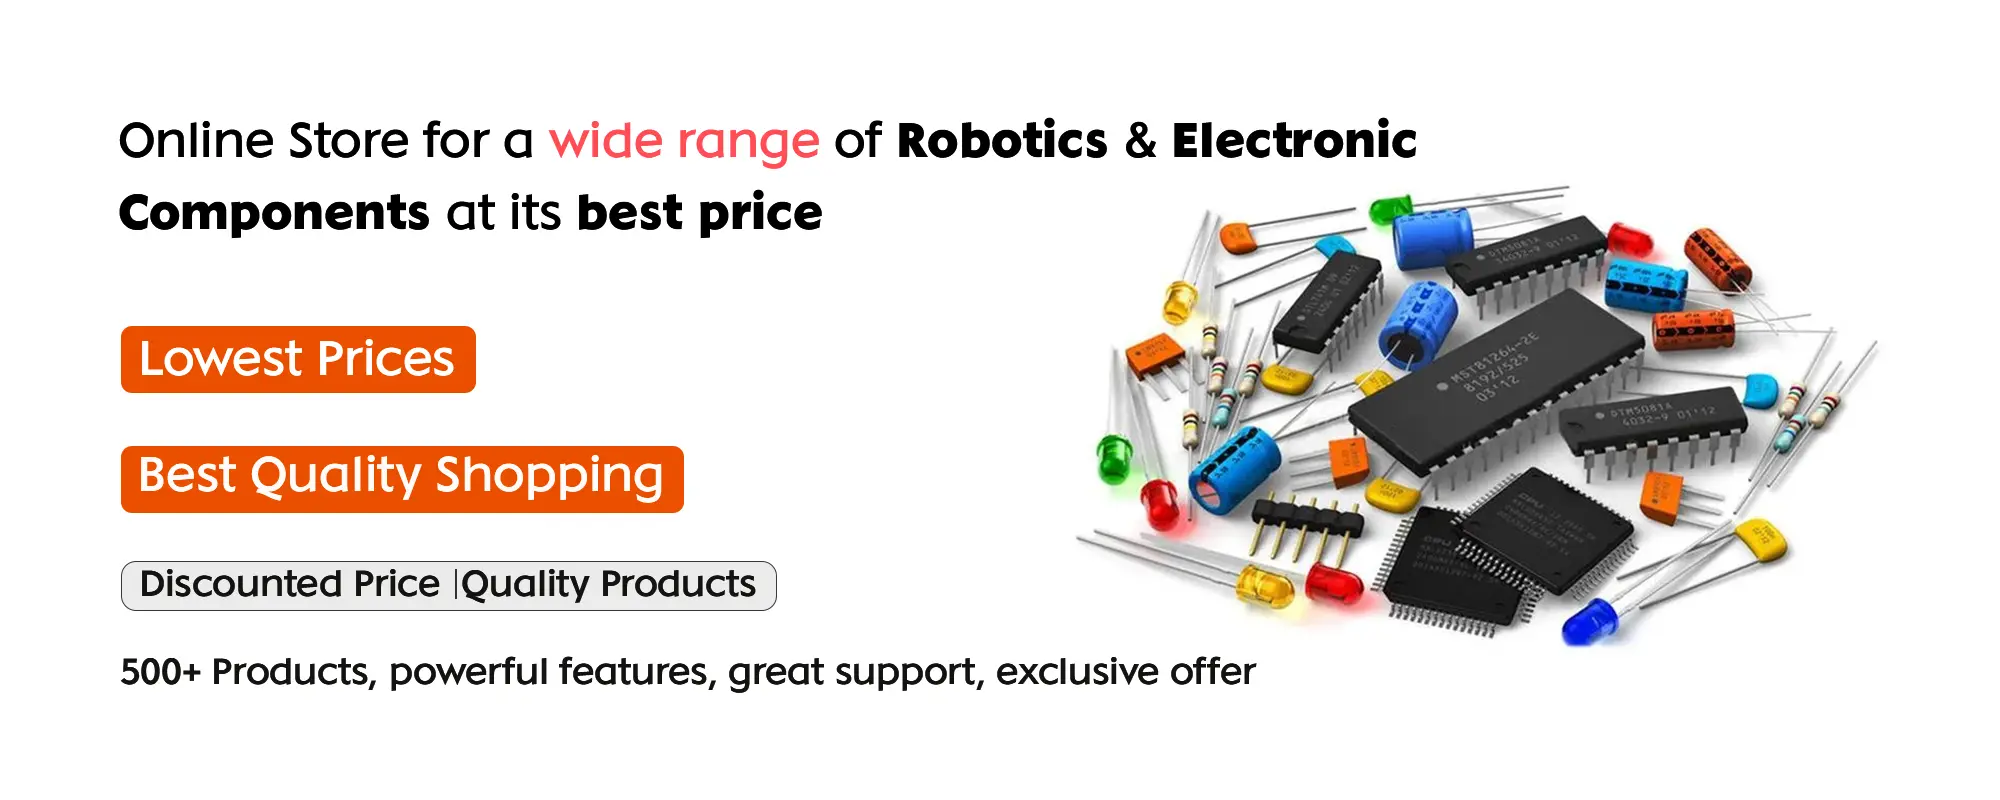 Gadget PCB - Electronics & Mobile Computers Accessories Store In Bangladesh